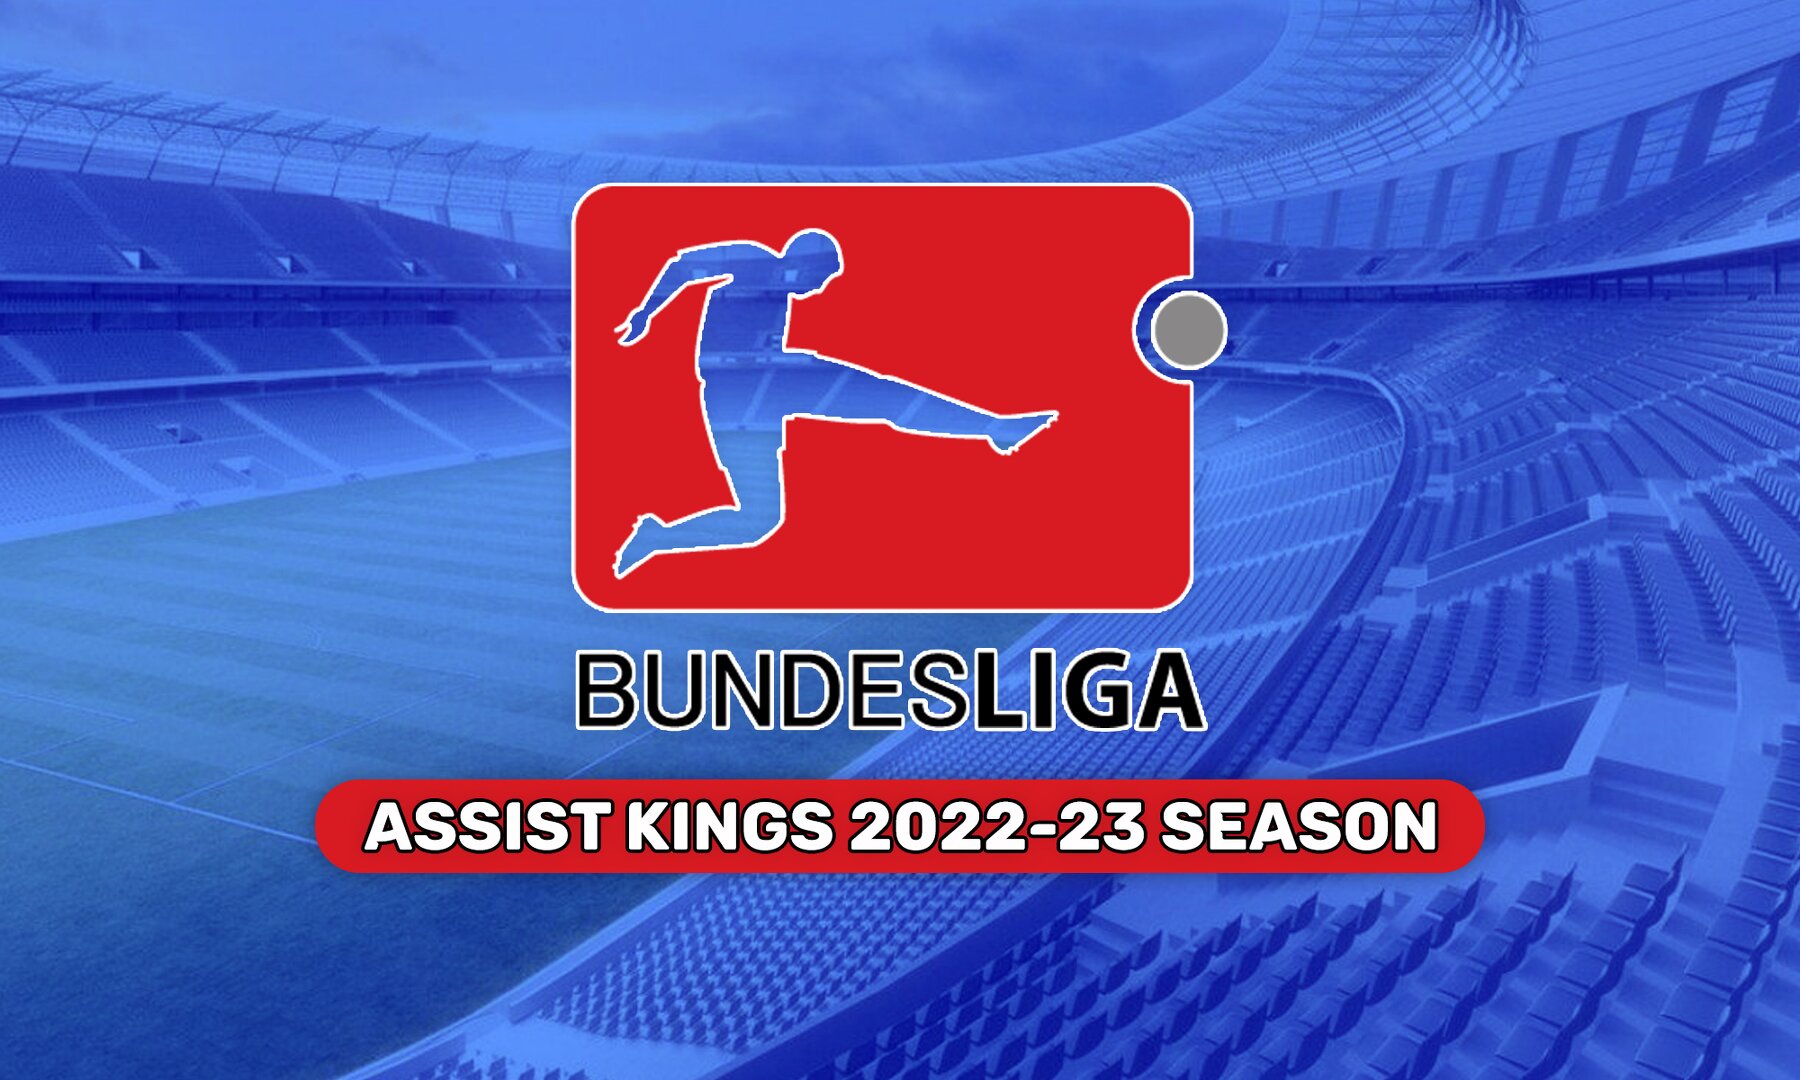 Top 10 players with most assists in Bundesliga 2022-23